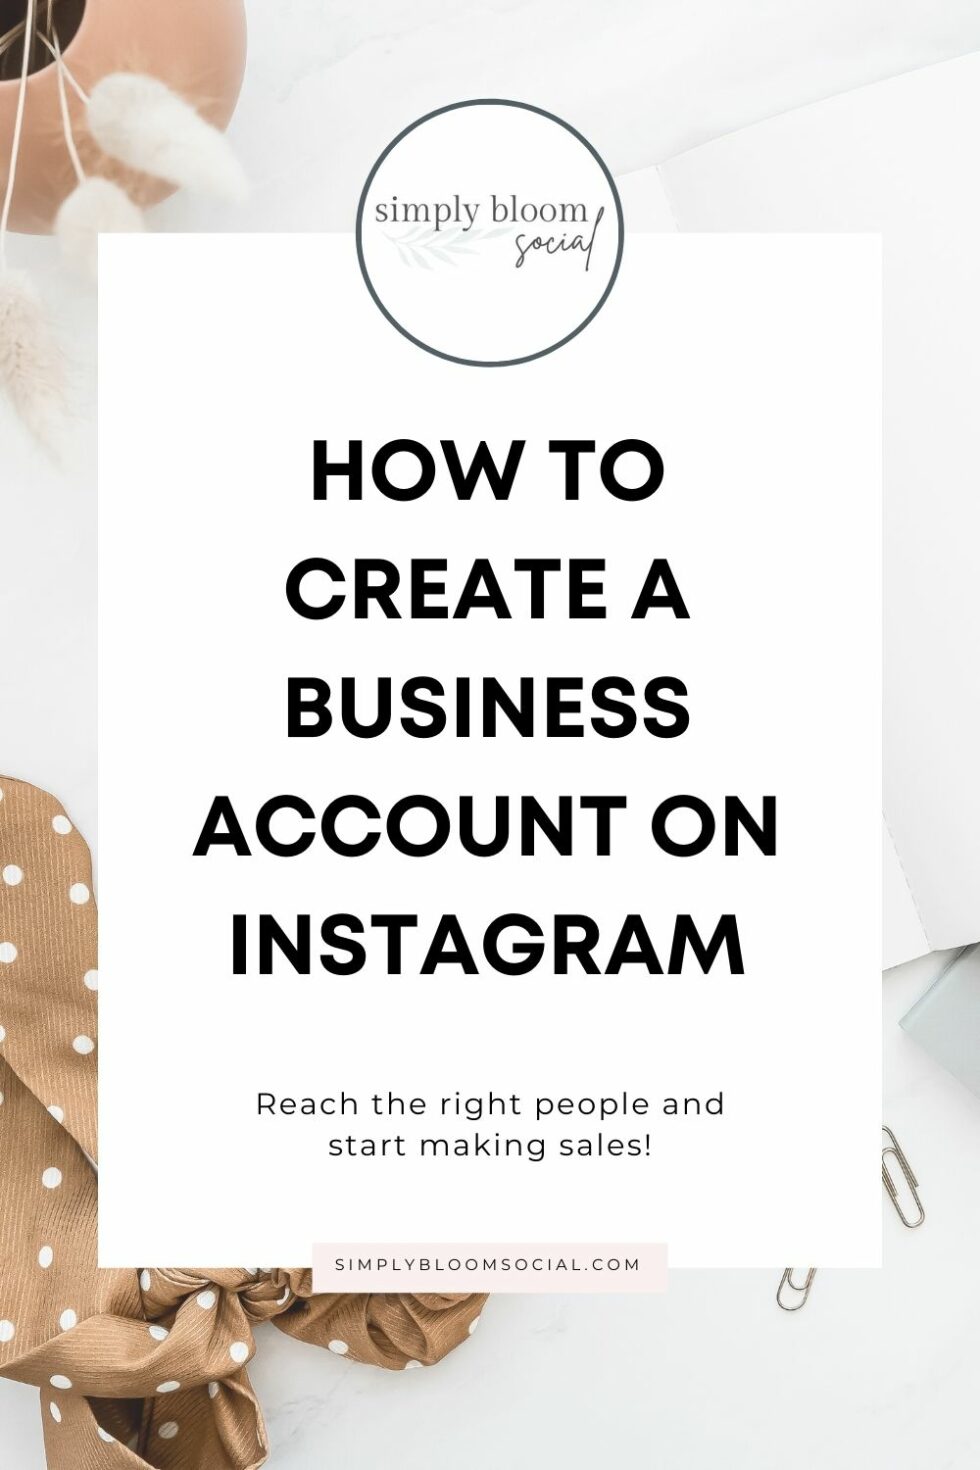 Should you create a new Instagram account for your business?